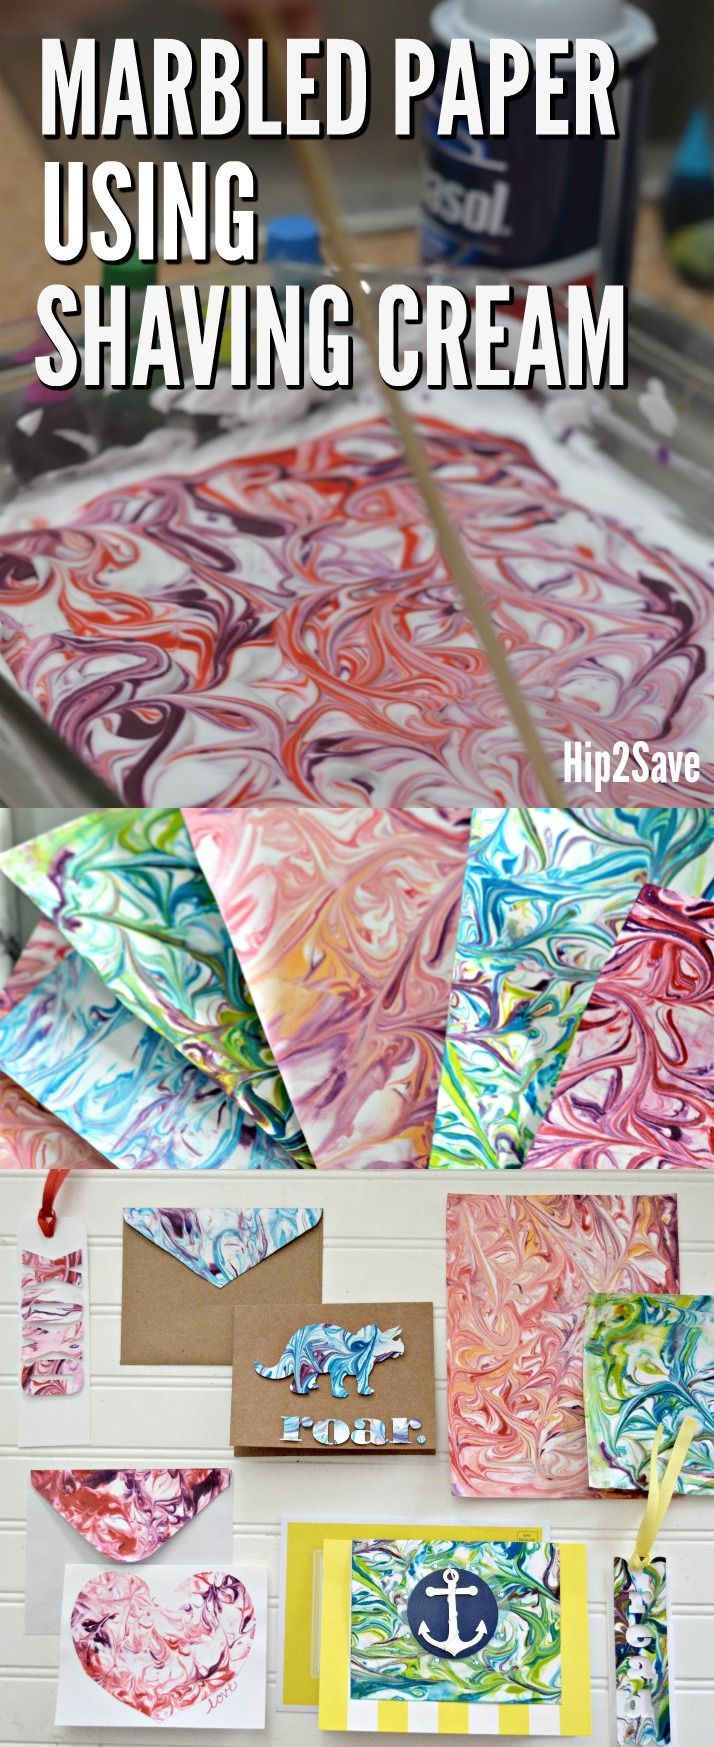 How to Marble Paper Using Shaving Cream (FUN Craft Idea!) - Hip2Save -   19 diy projects For Boys food coloring ideas